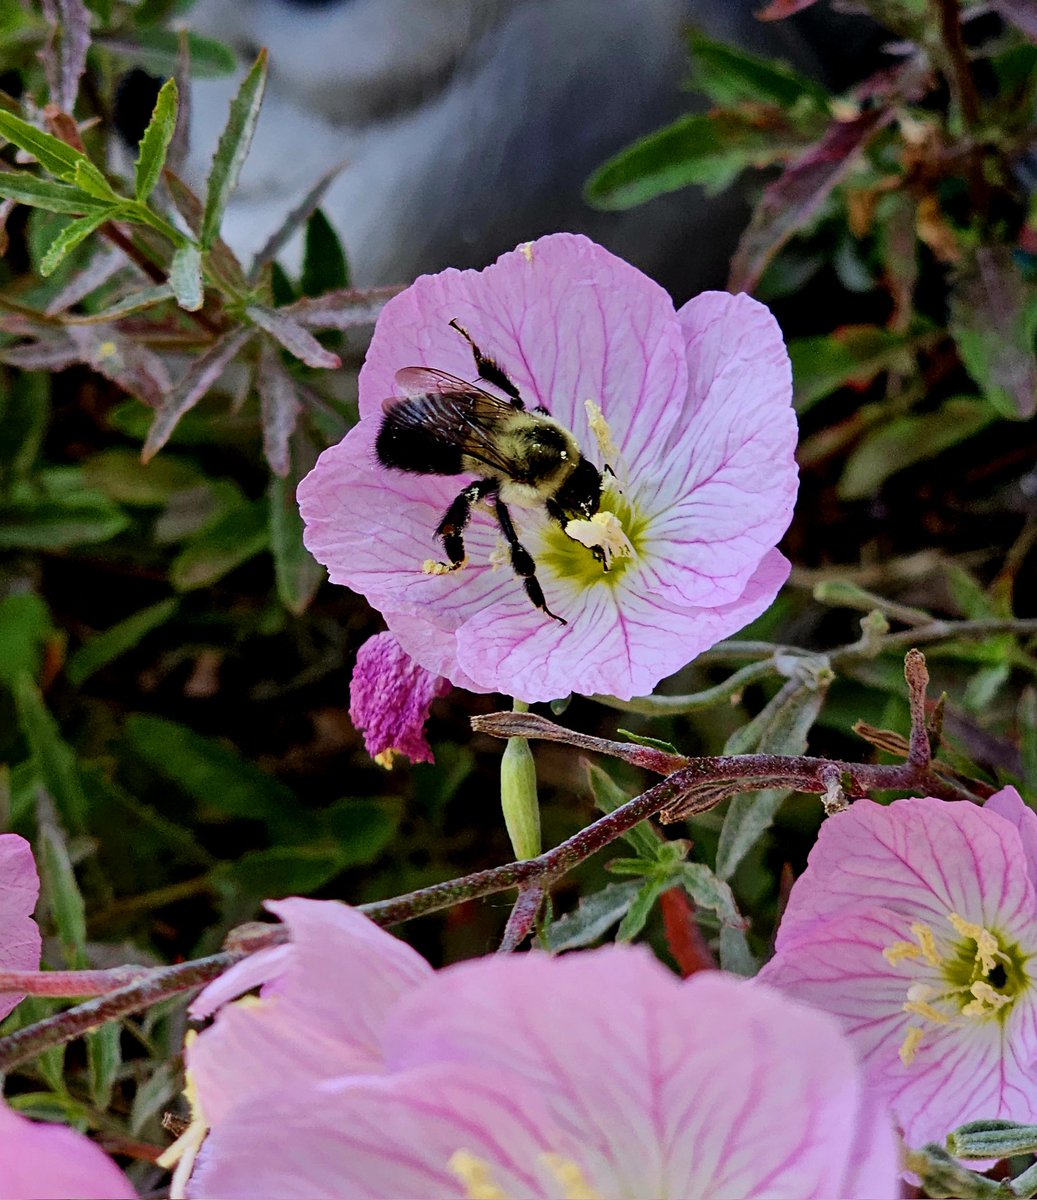 A fluffy honeybee collecting some pollen from a pink Primrose. 

#PollinatorWeek #InsectWeek #Bees #SaveTheBees #wildlifephotography